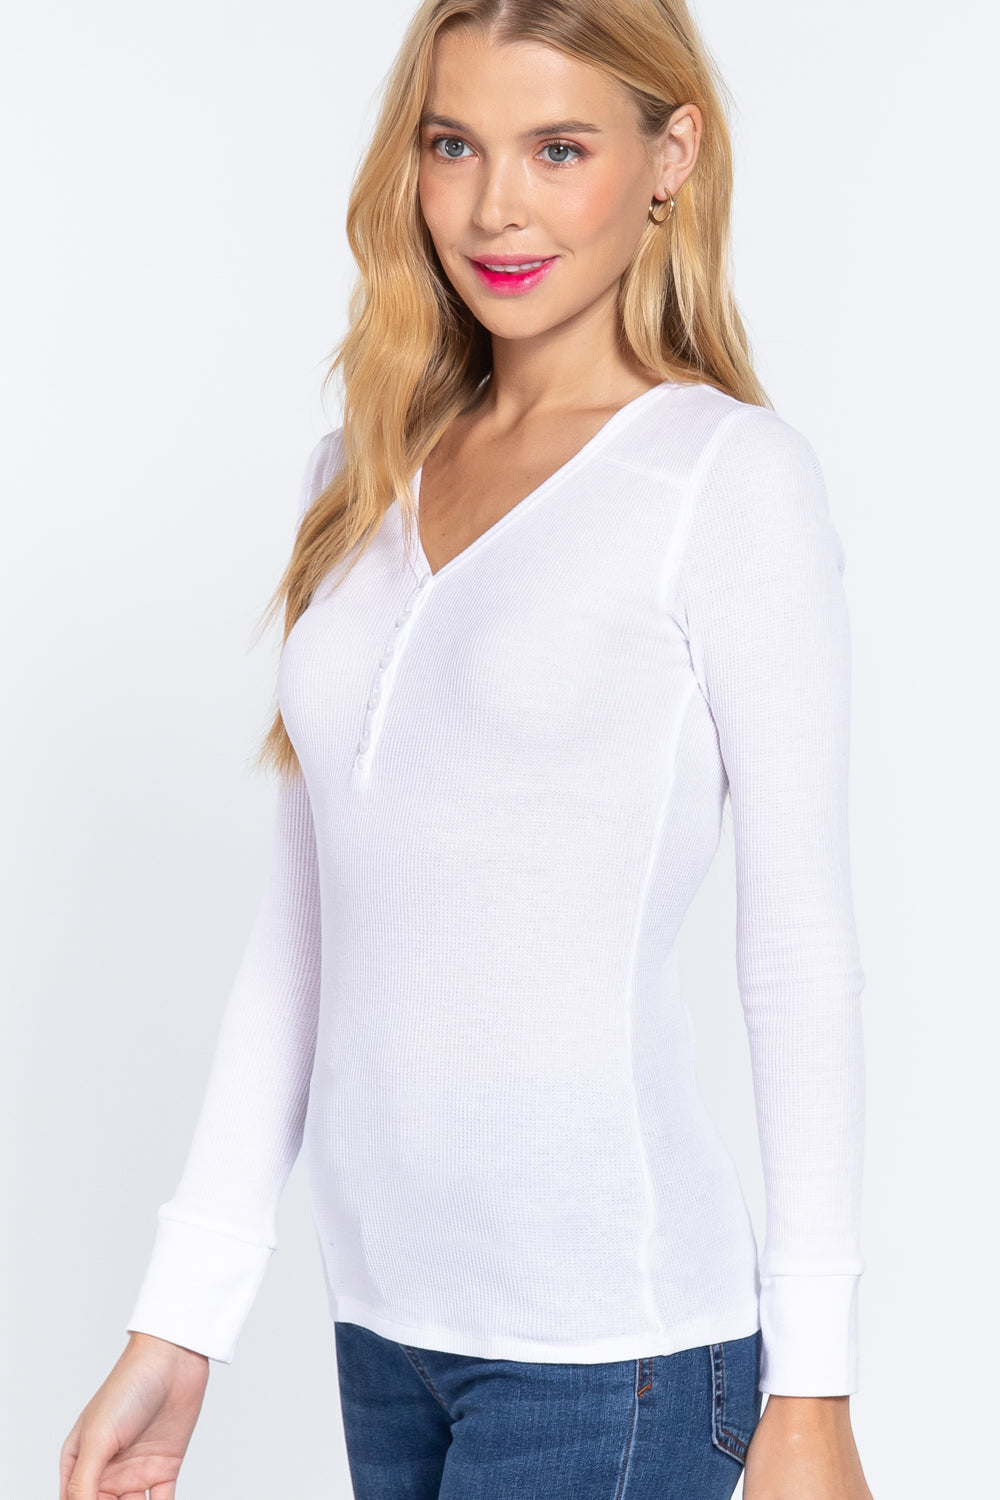 The802Gypsy  shirts and tops White / S ❤GYPSY LOVE-V-neck Placket Thermal Top